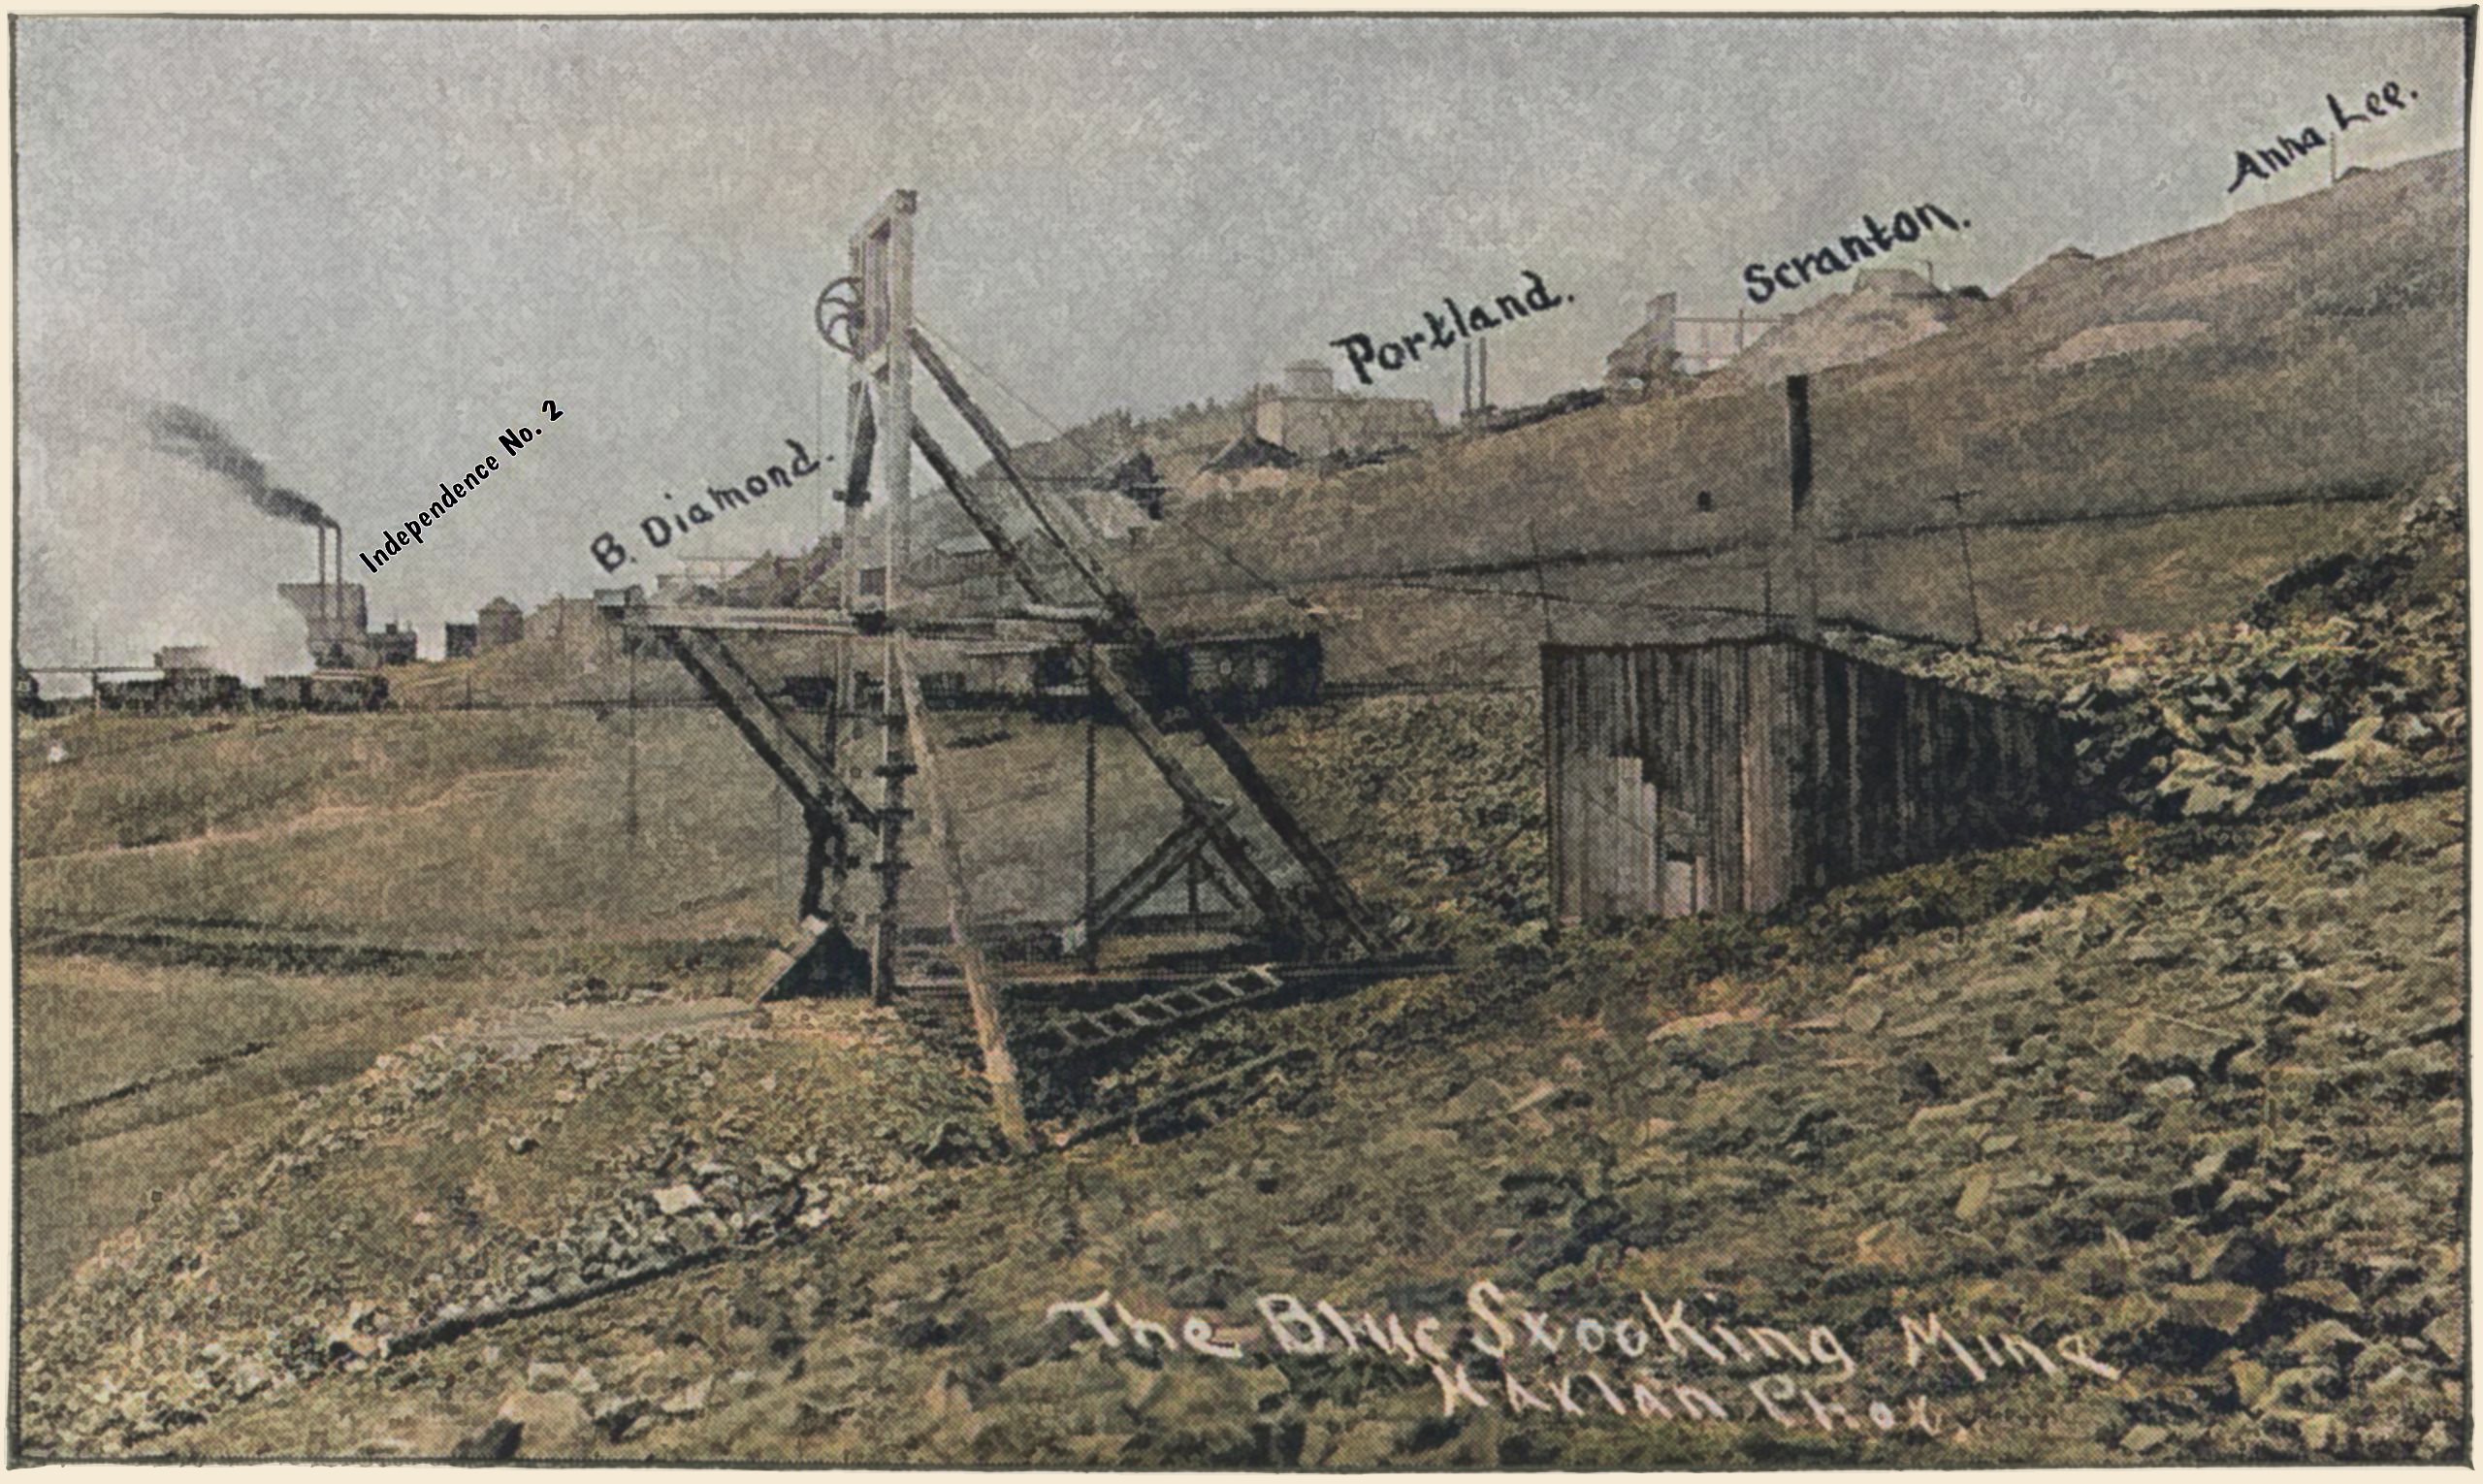 The Blue Stocking Mine | Battle Mountain, Showing the Blue Stocking, Independence No. 2, Black Diamond, Portland, Scranton and Anna Lee Mines Marked Out